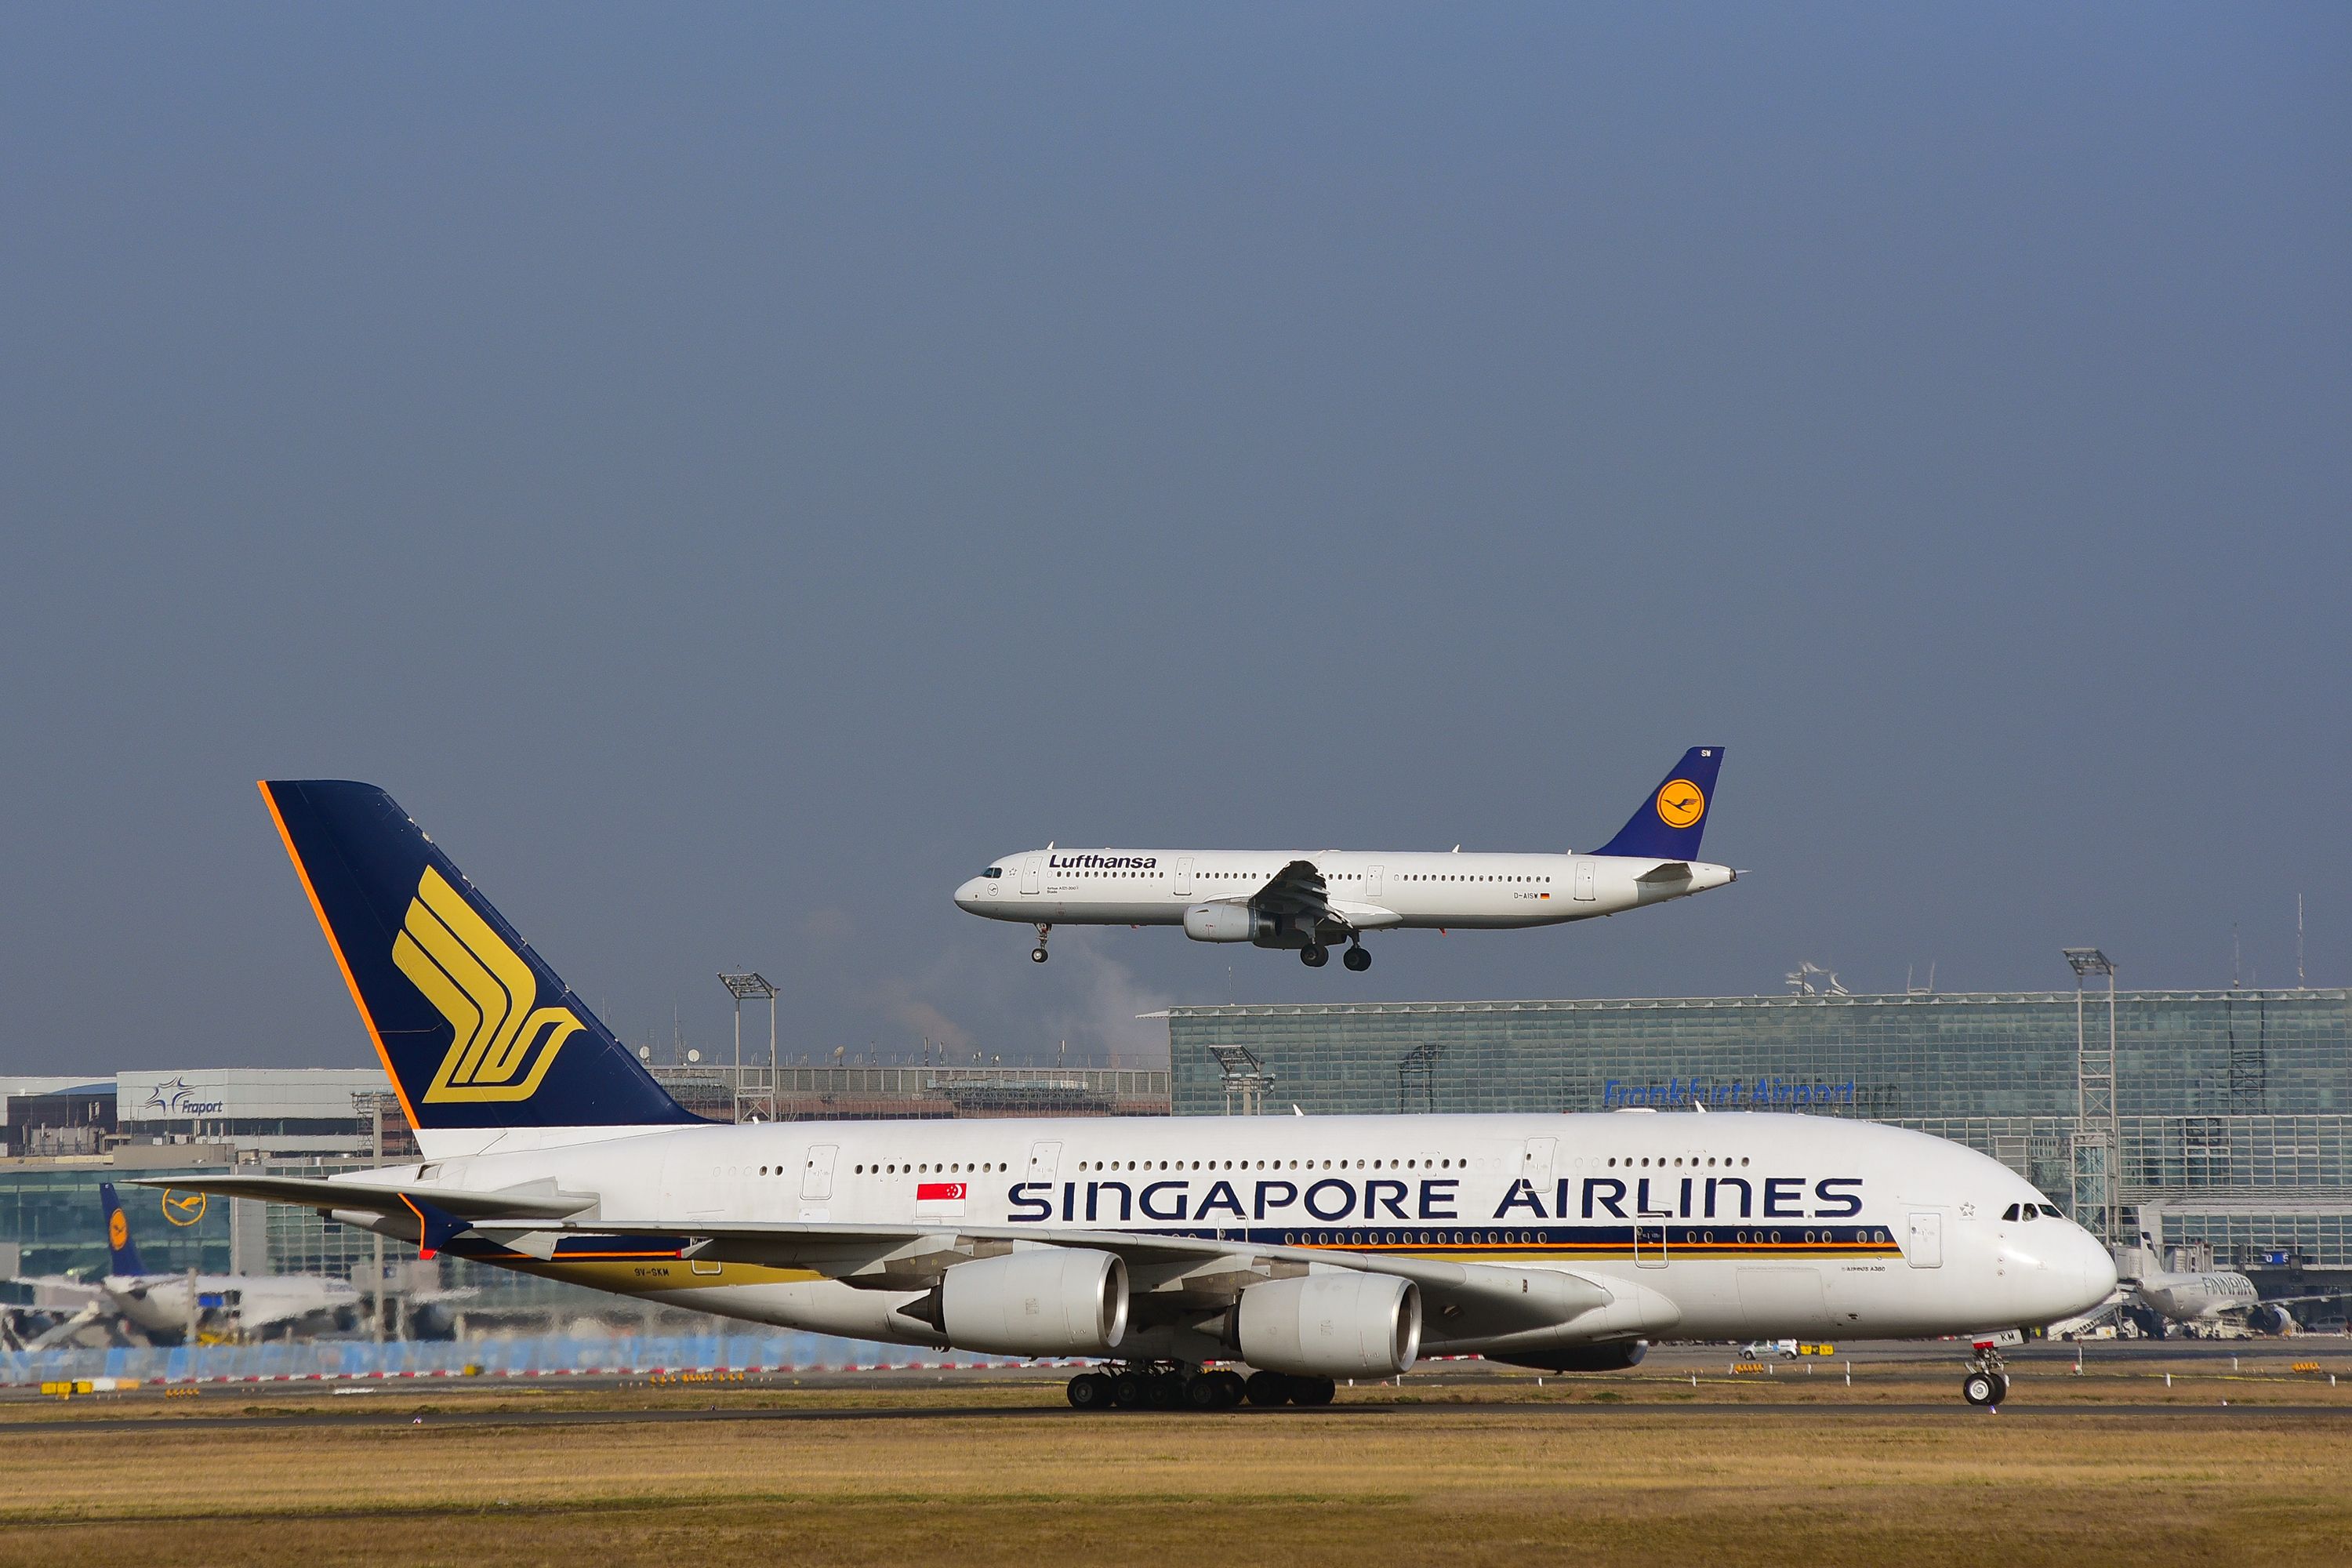 A Singapore Airlines Airbus A380 taxiing at Frankfurt Airport.